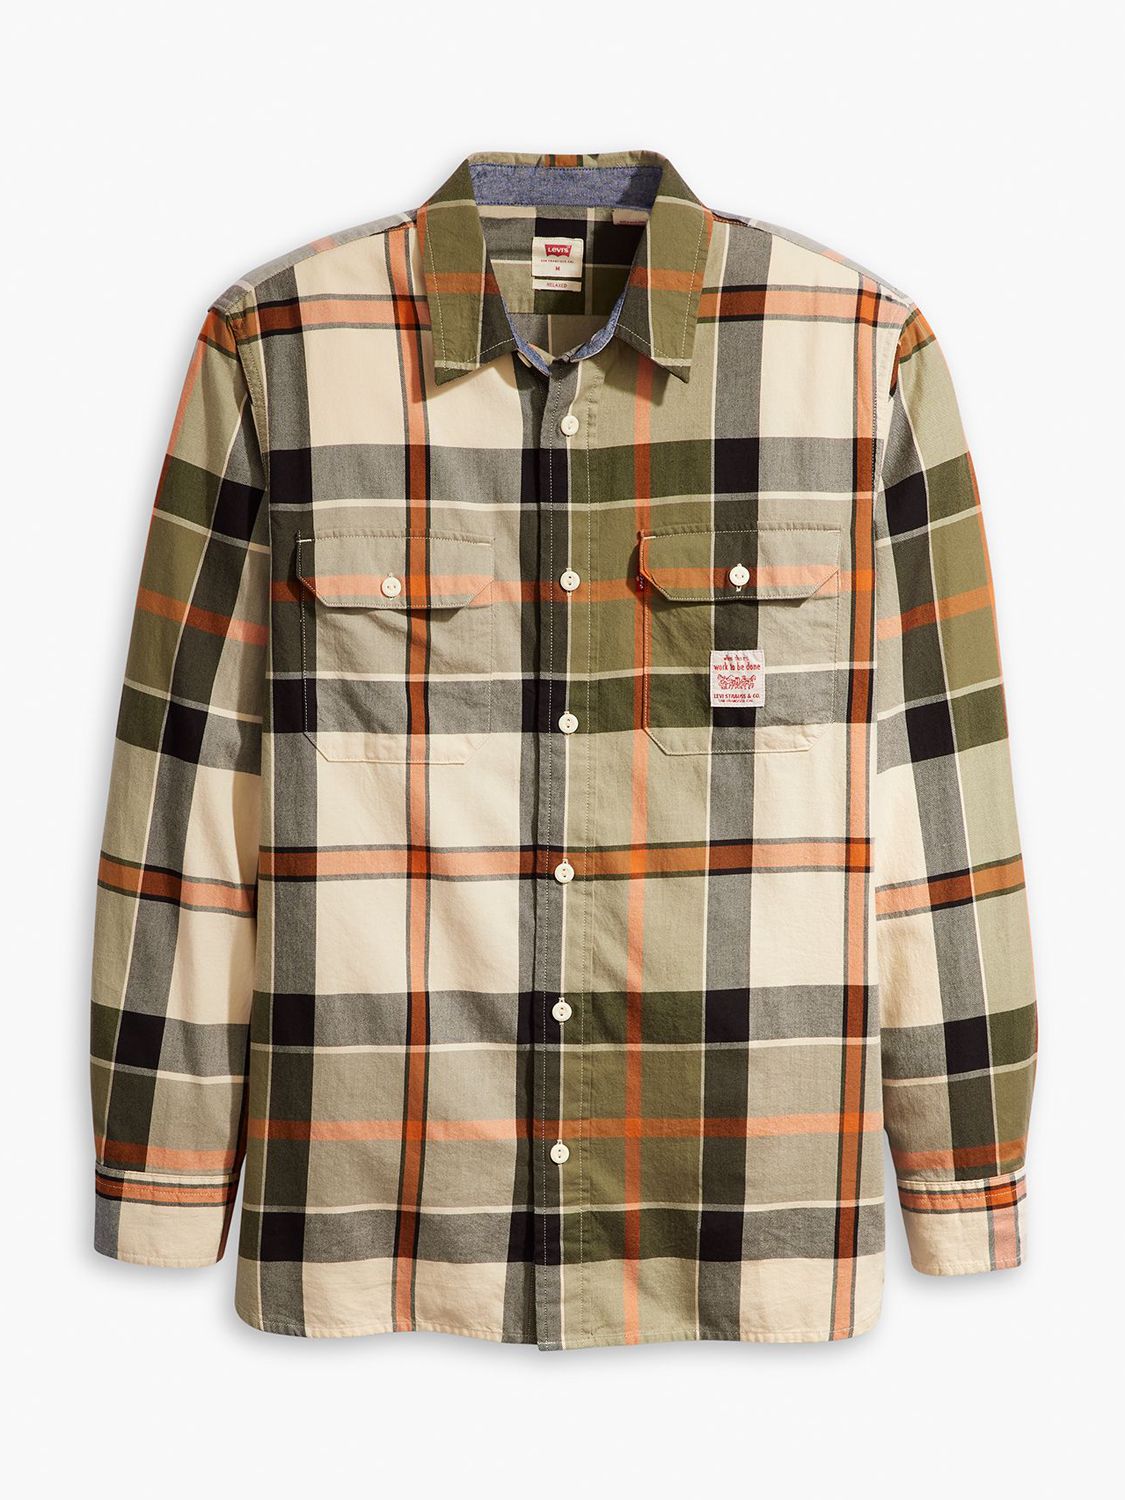 Levi's Classic Relaxed Fit Worker Shirt, Multi, M